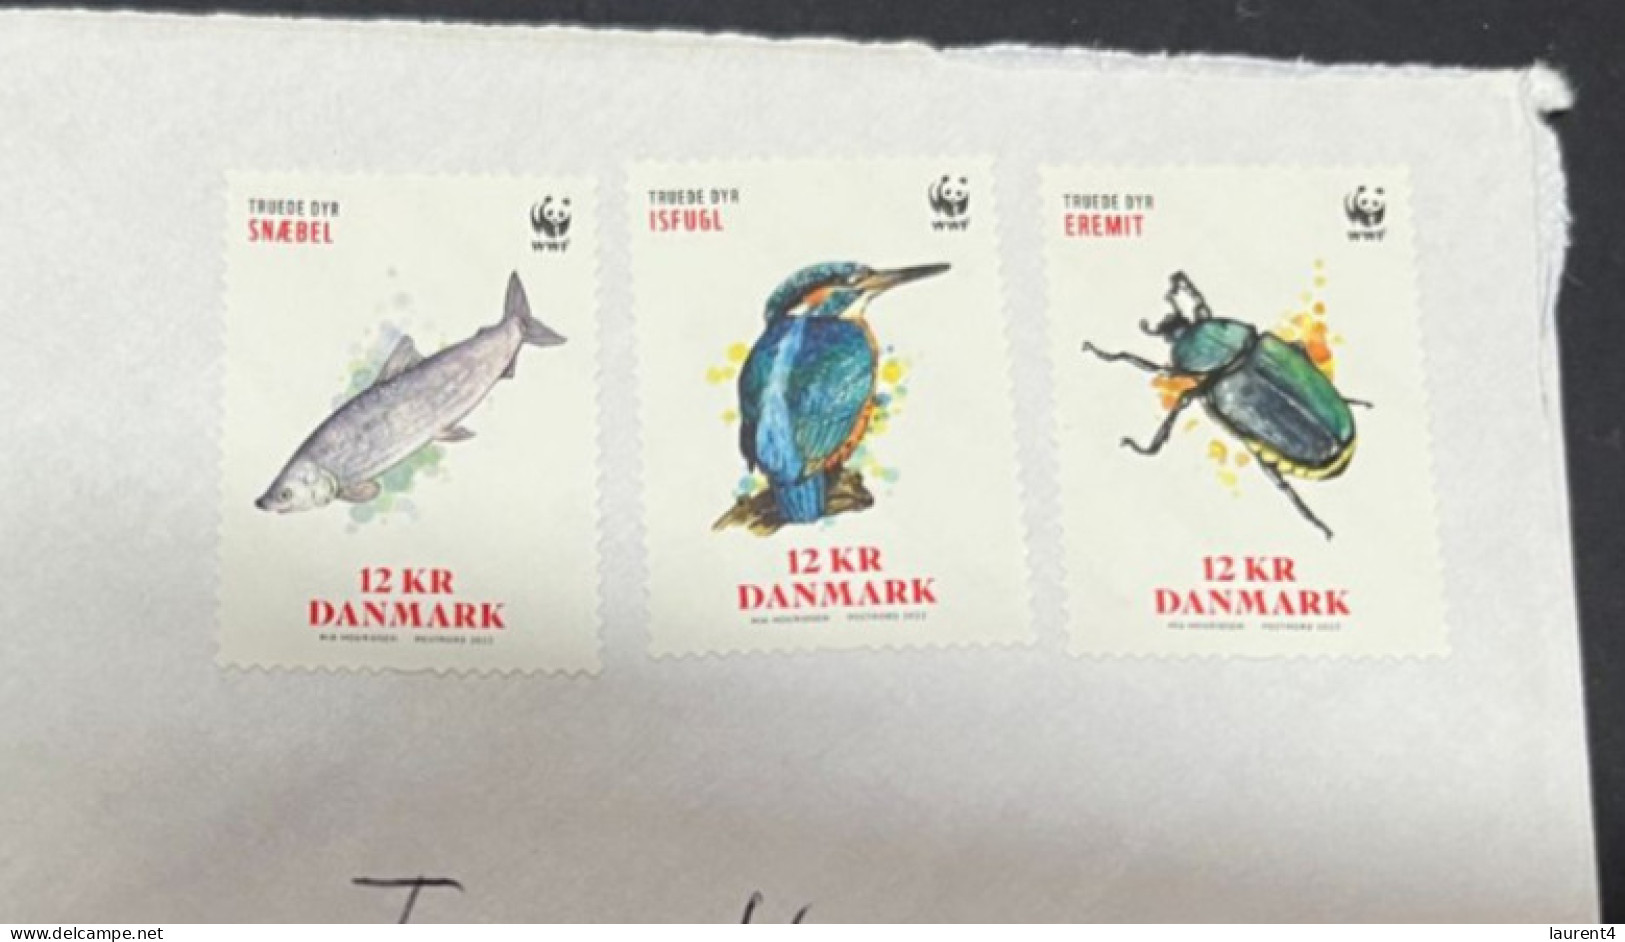 4-4-2024 (1 Z 3 A) Letter Posted From Denmark To Australia (Sydney) With 3 WWF Stamps 2022 Issue (no Postmark) - Brieven En Documenten